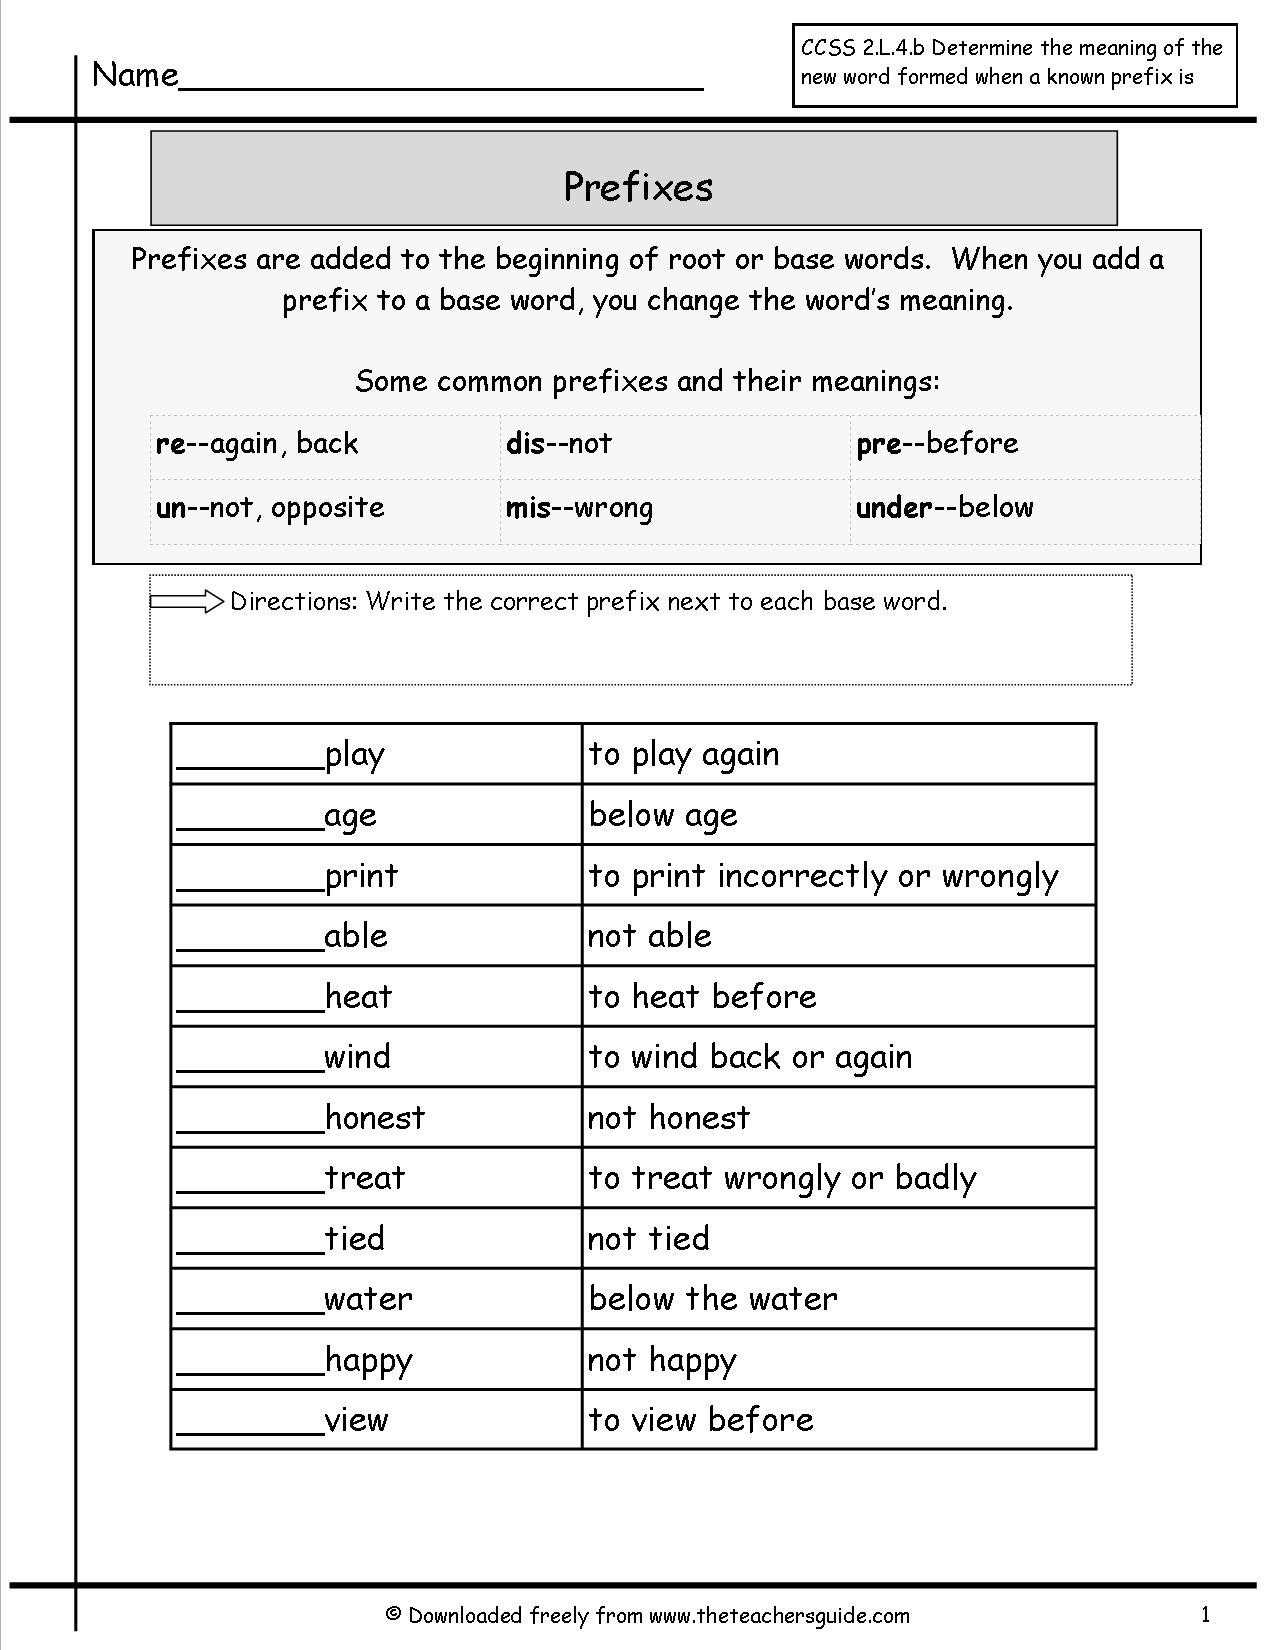 Prefix Worksheets 4th Grade Free Prefixes and Suffixes Worksheets From the Teacher S Guide